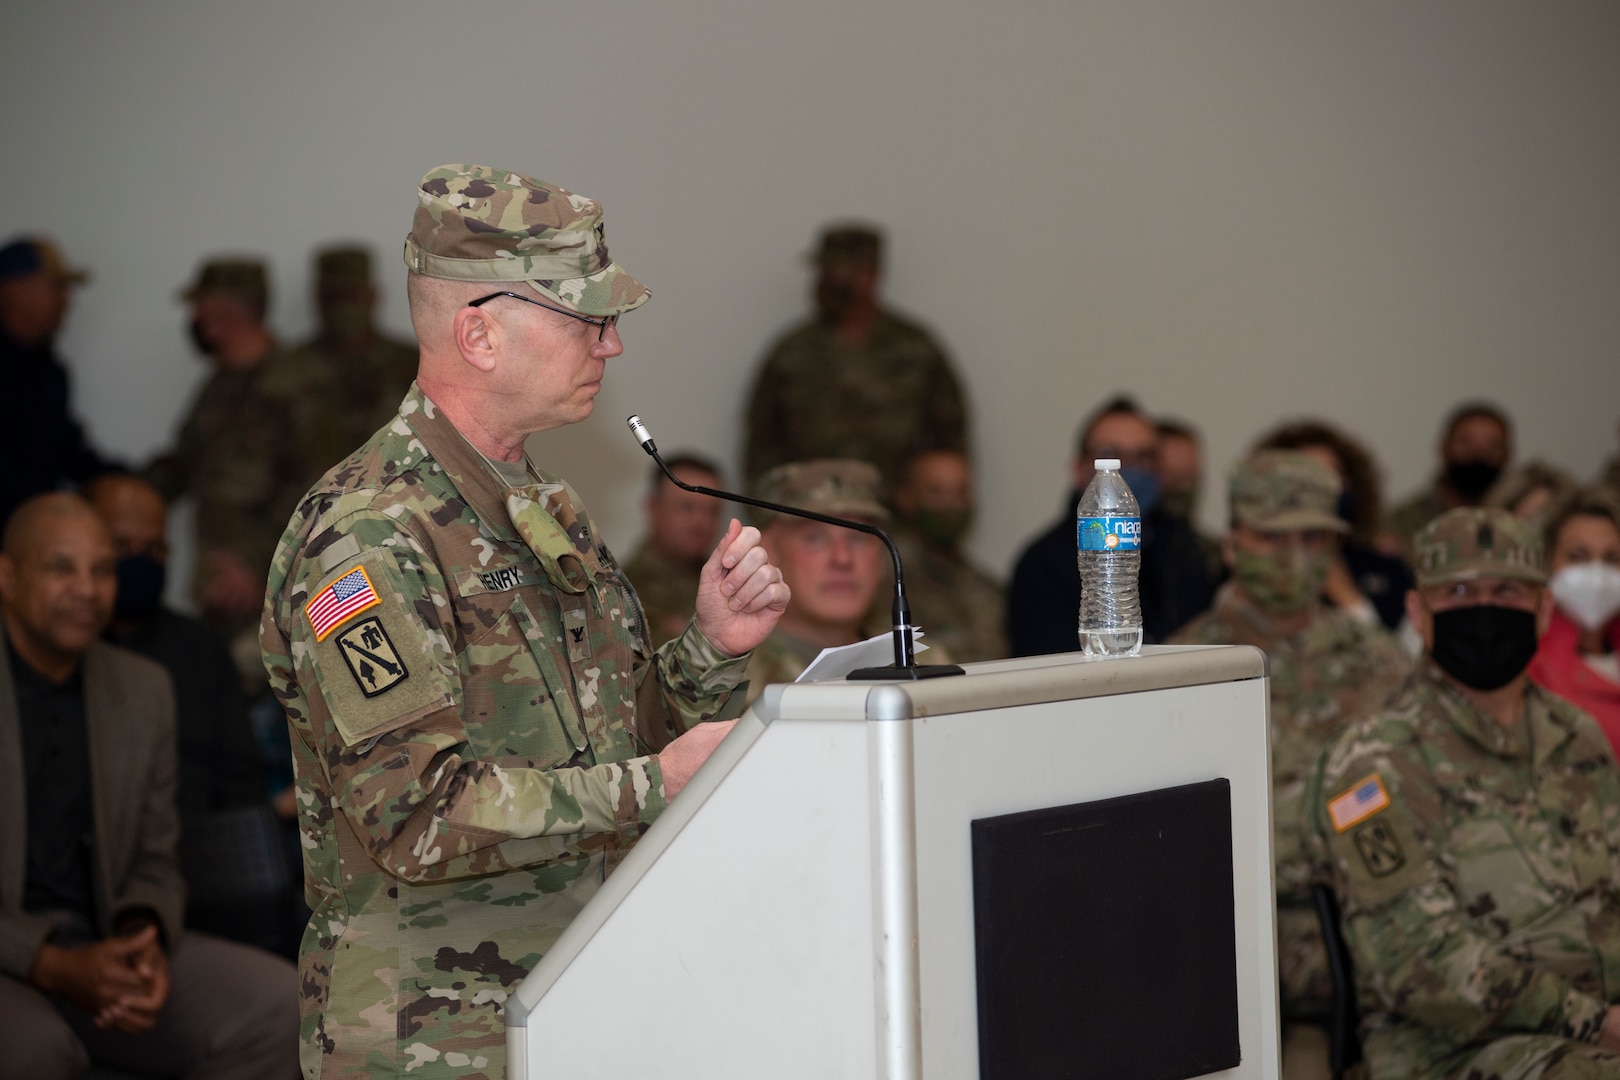 Oklahoma Army National Guard Col. Jason Henry addresses Soldiers with the 45th Field Artillery Brigade during a change of command ceremony at the Armed Forces Reserve Center in Mustang, Oklahoma, Jan. 8, 2022. Henry has received multiple awards in his career to include the Meritorious Service Medal, Bronze Star and Humanitarian Service Medal.  His service was commemorated with the pinning of the Legion of Merit award in recognition of his exceptionally meritorious conduct.(Oklahoma National Guard photo by Sgt. 1st Class Mireille Merilice-Roberts)